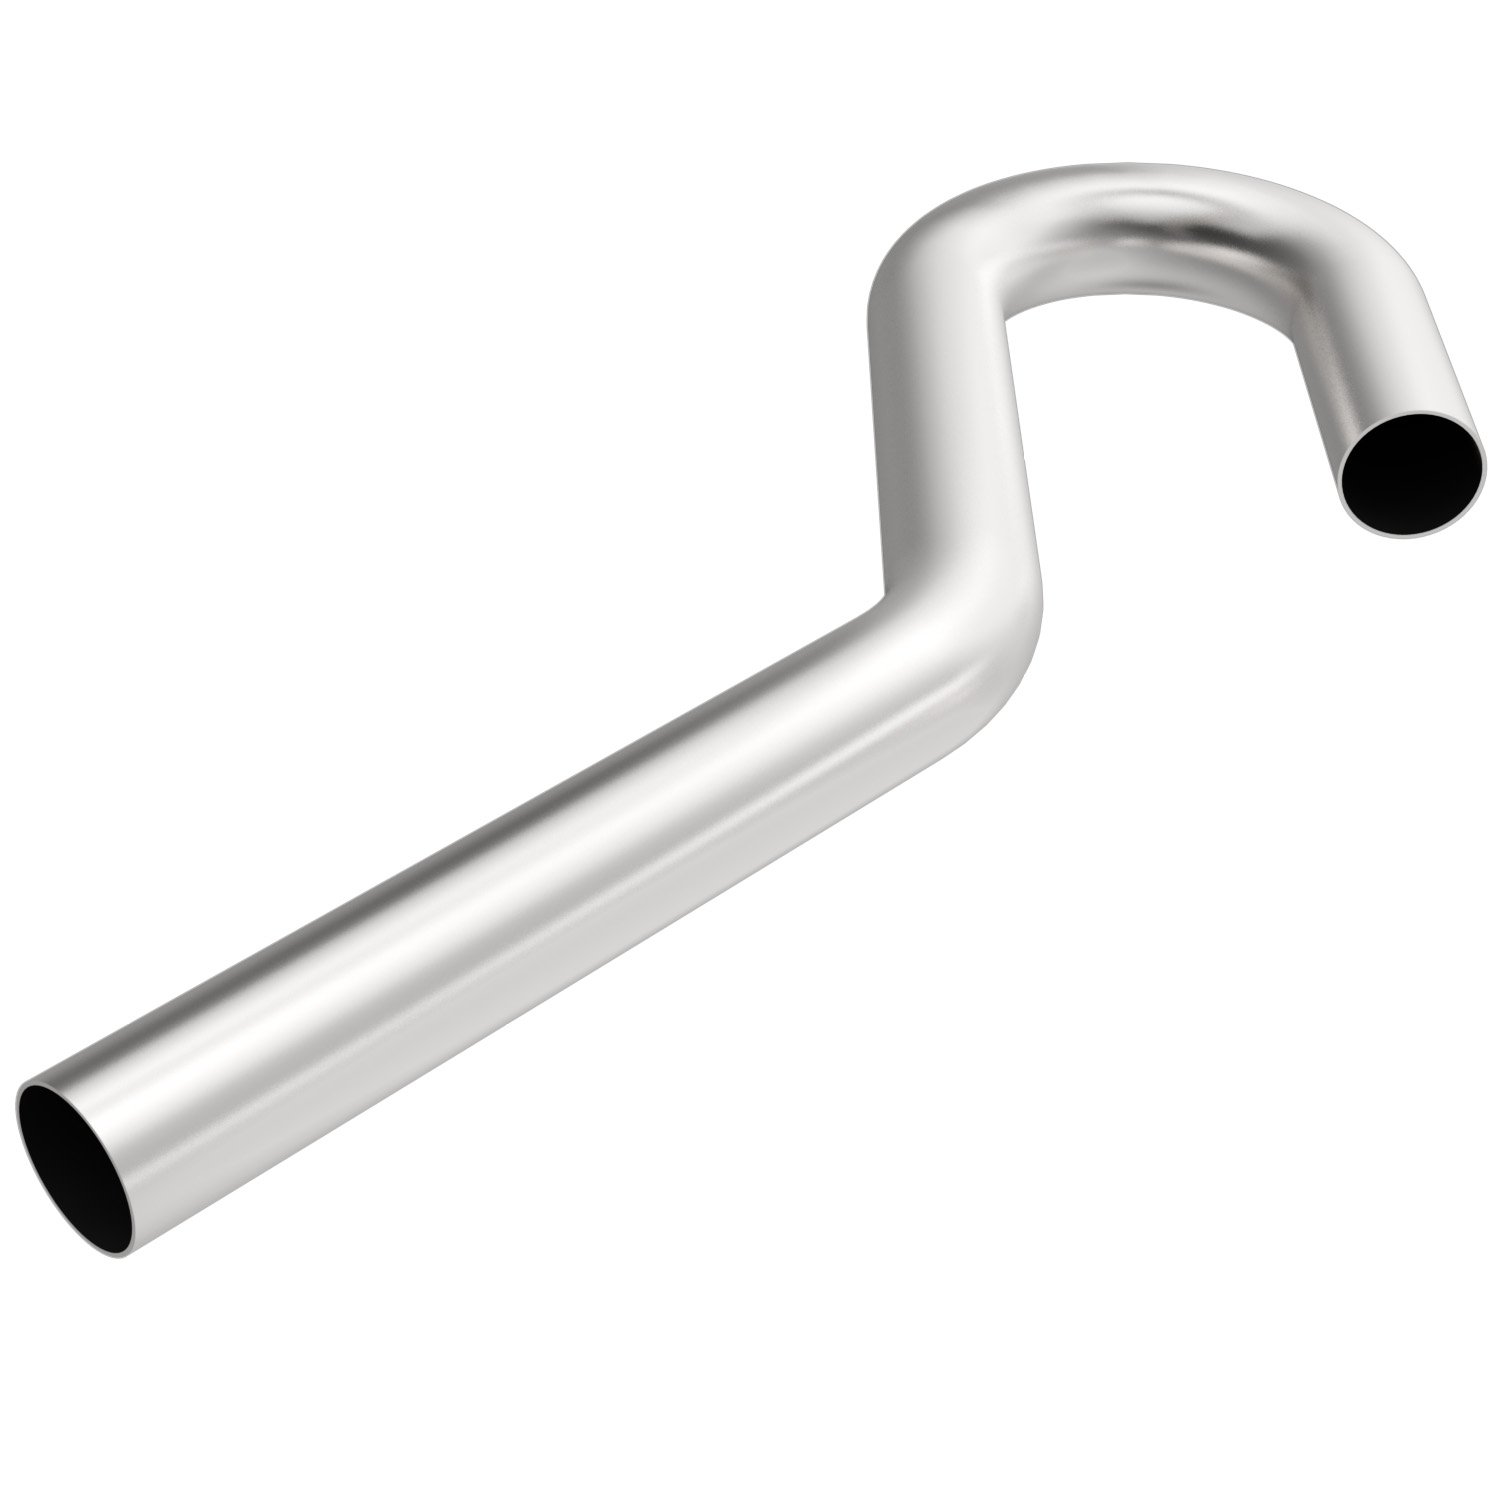 Stainless Steel 3-in-1 Transition Exhaust Pipe With 45°/90°/180°